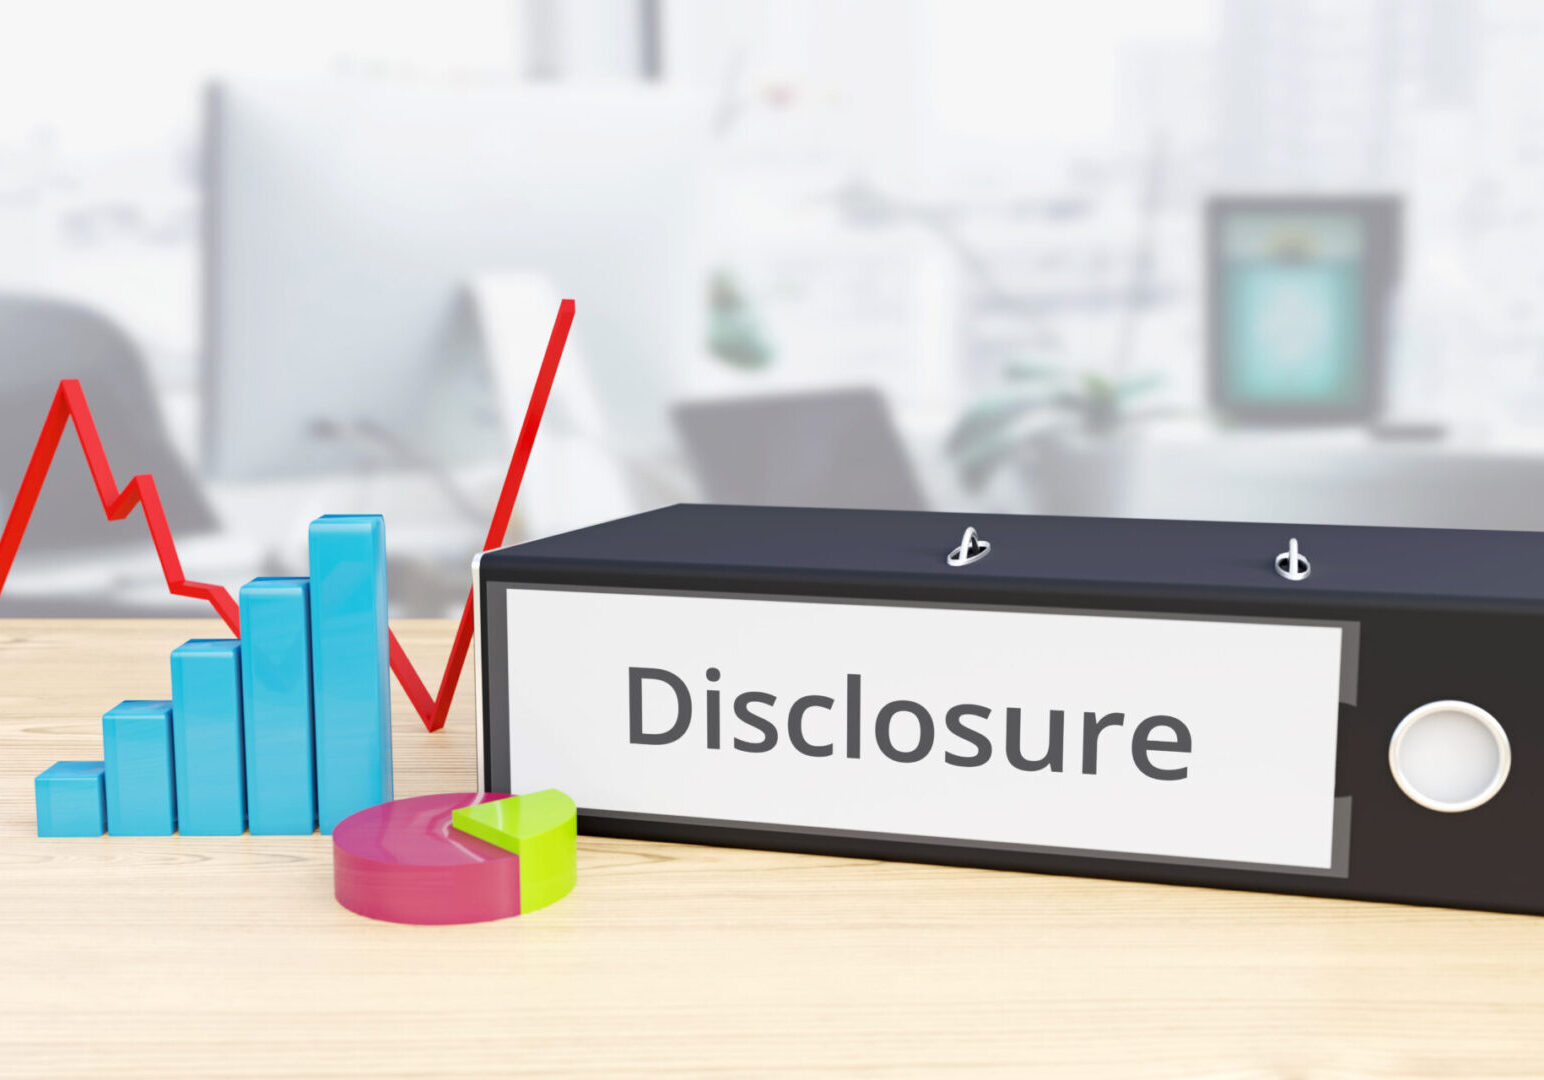 A disclosure sign sitting on top of a desk.